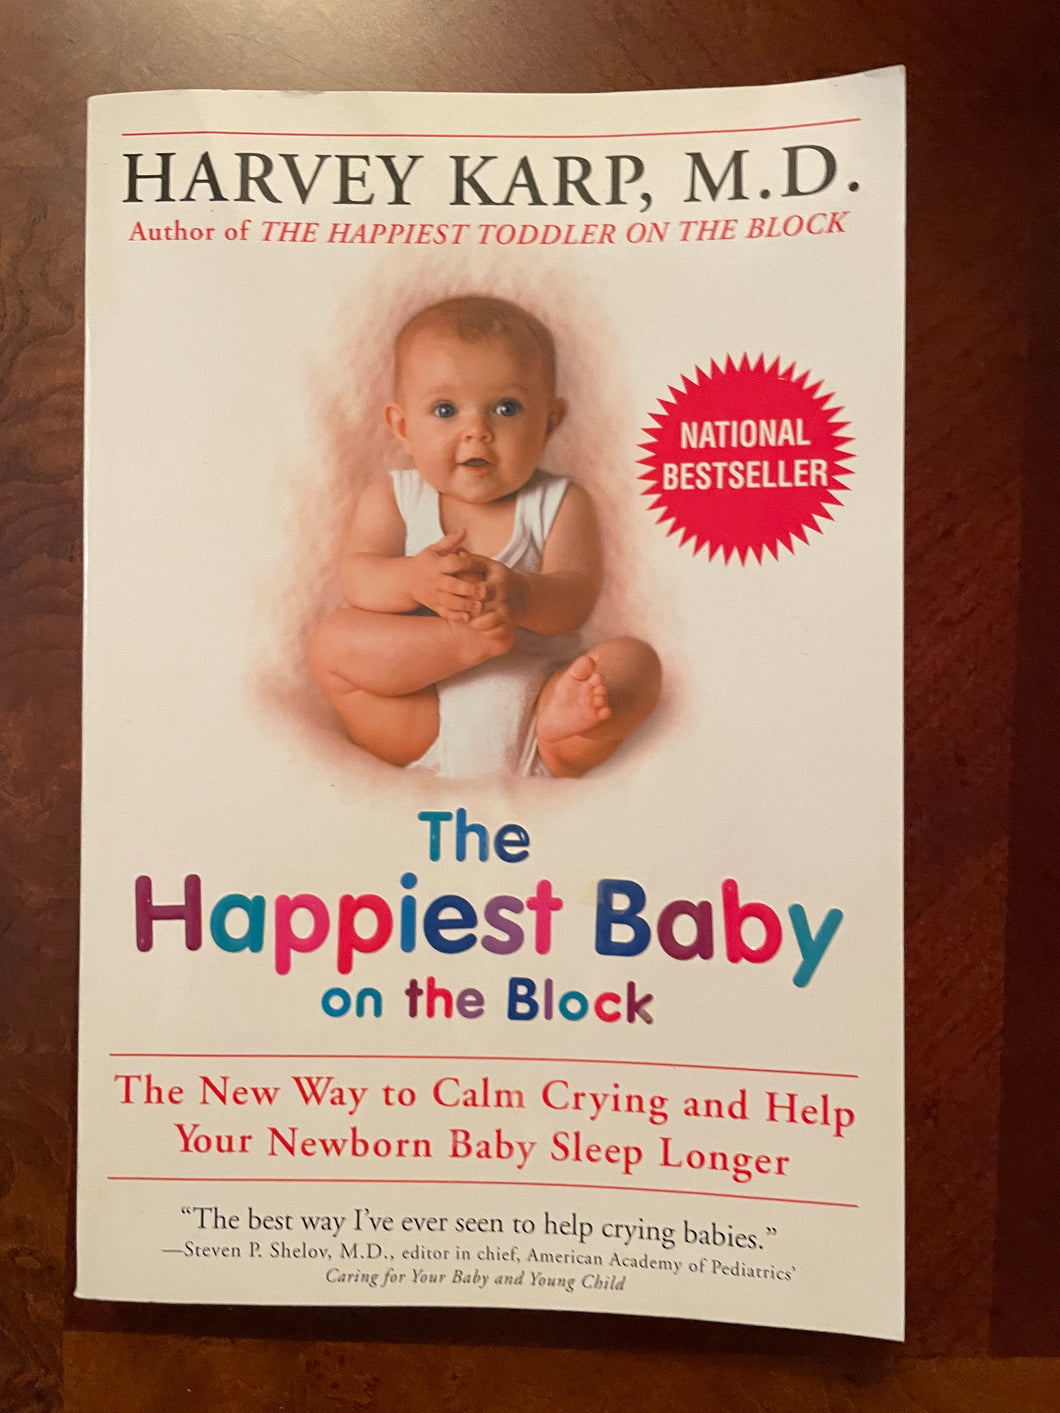 The happiest baby on the Block by Harvey Karp, MD